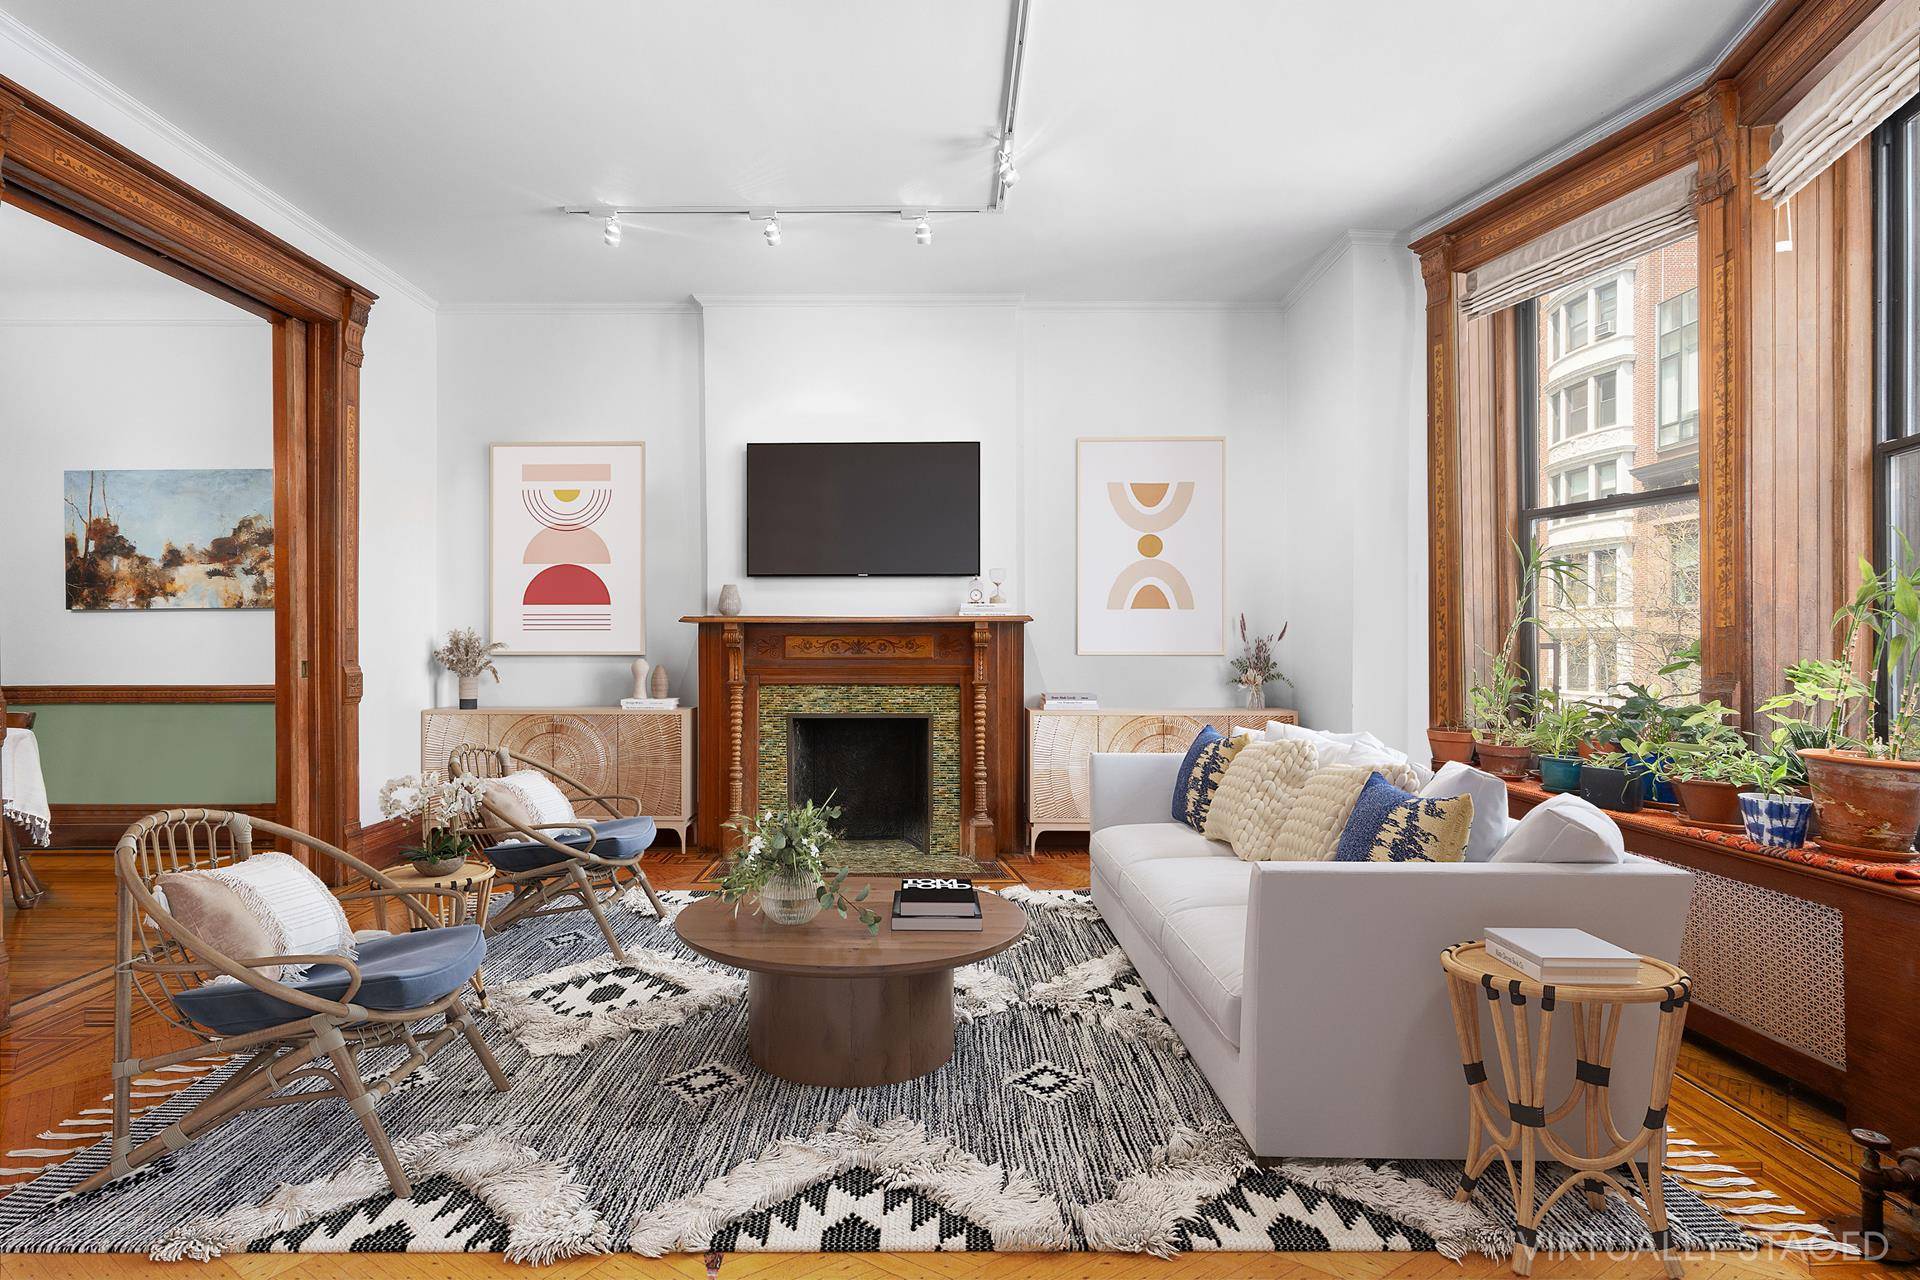 This Upper West Side three bedroom, two bath gem features beautifully restored woodwork throughout, a decorative fireplace, home office easily convertible to a fourth bedroom, and in unit washer dryer.